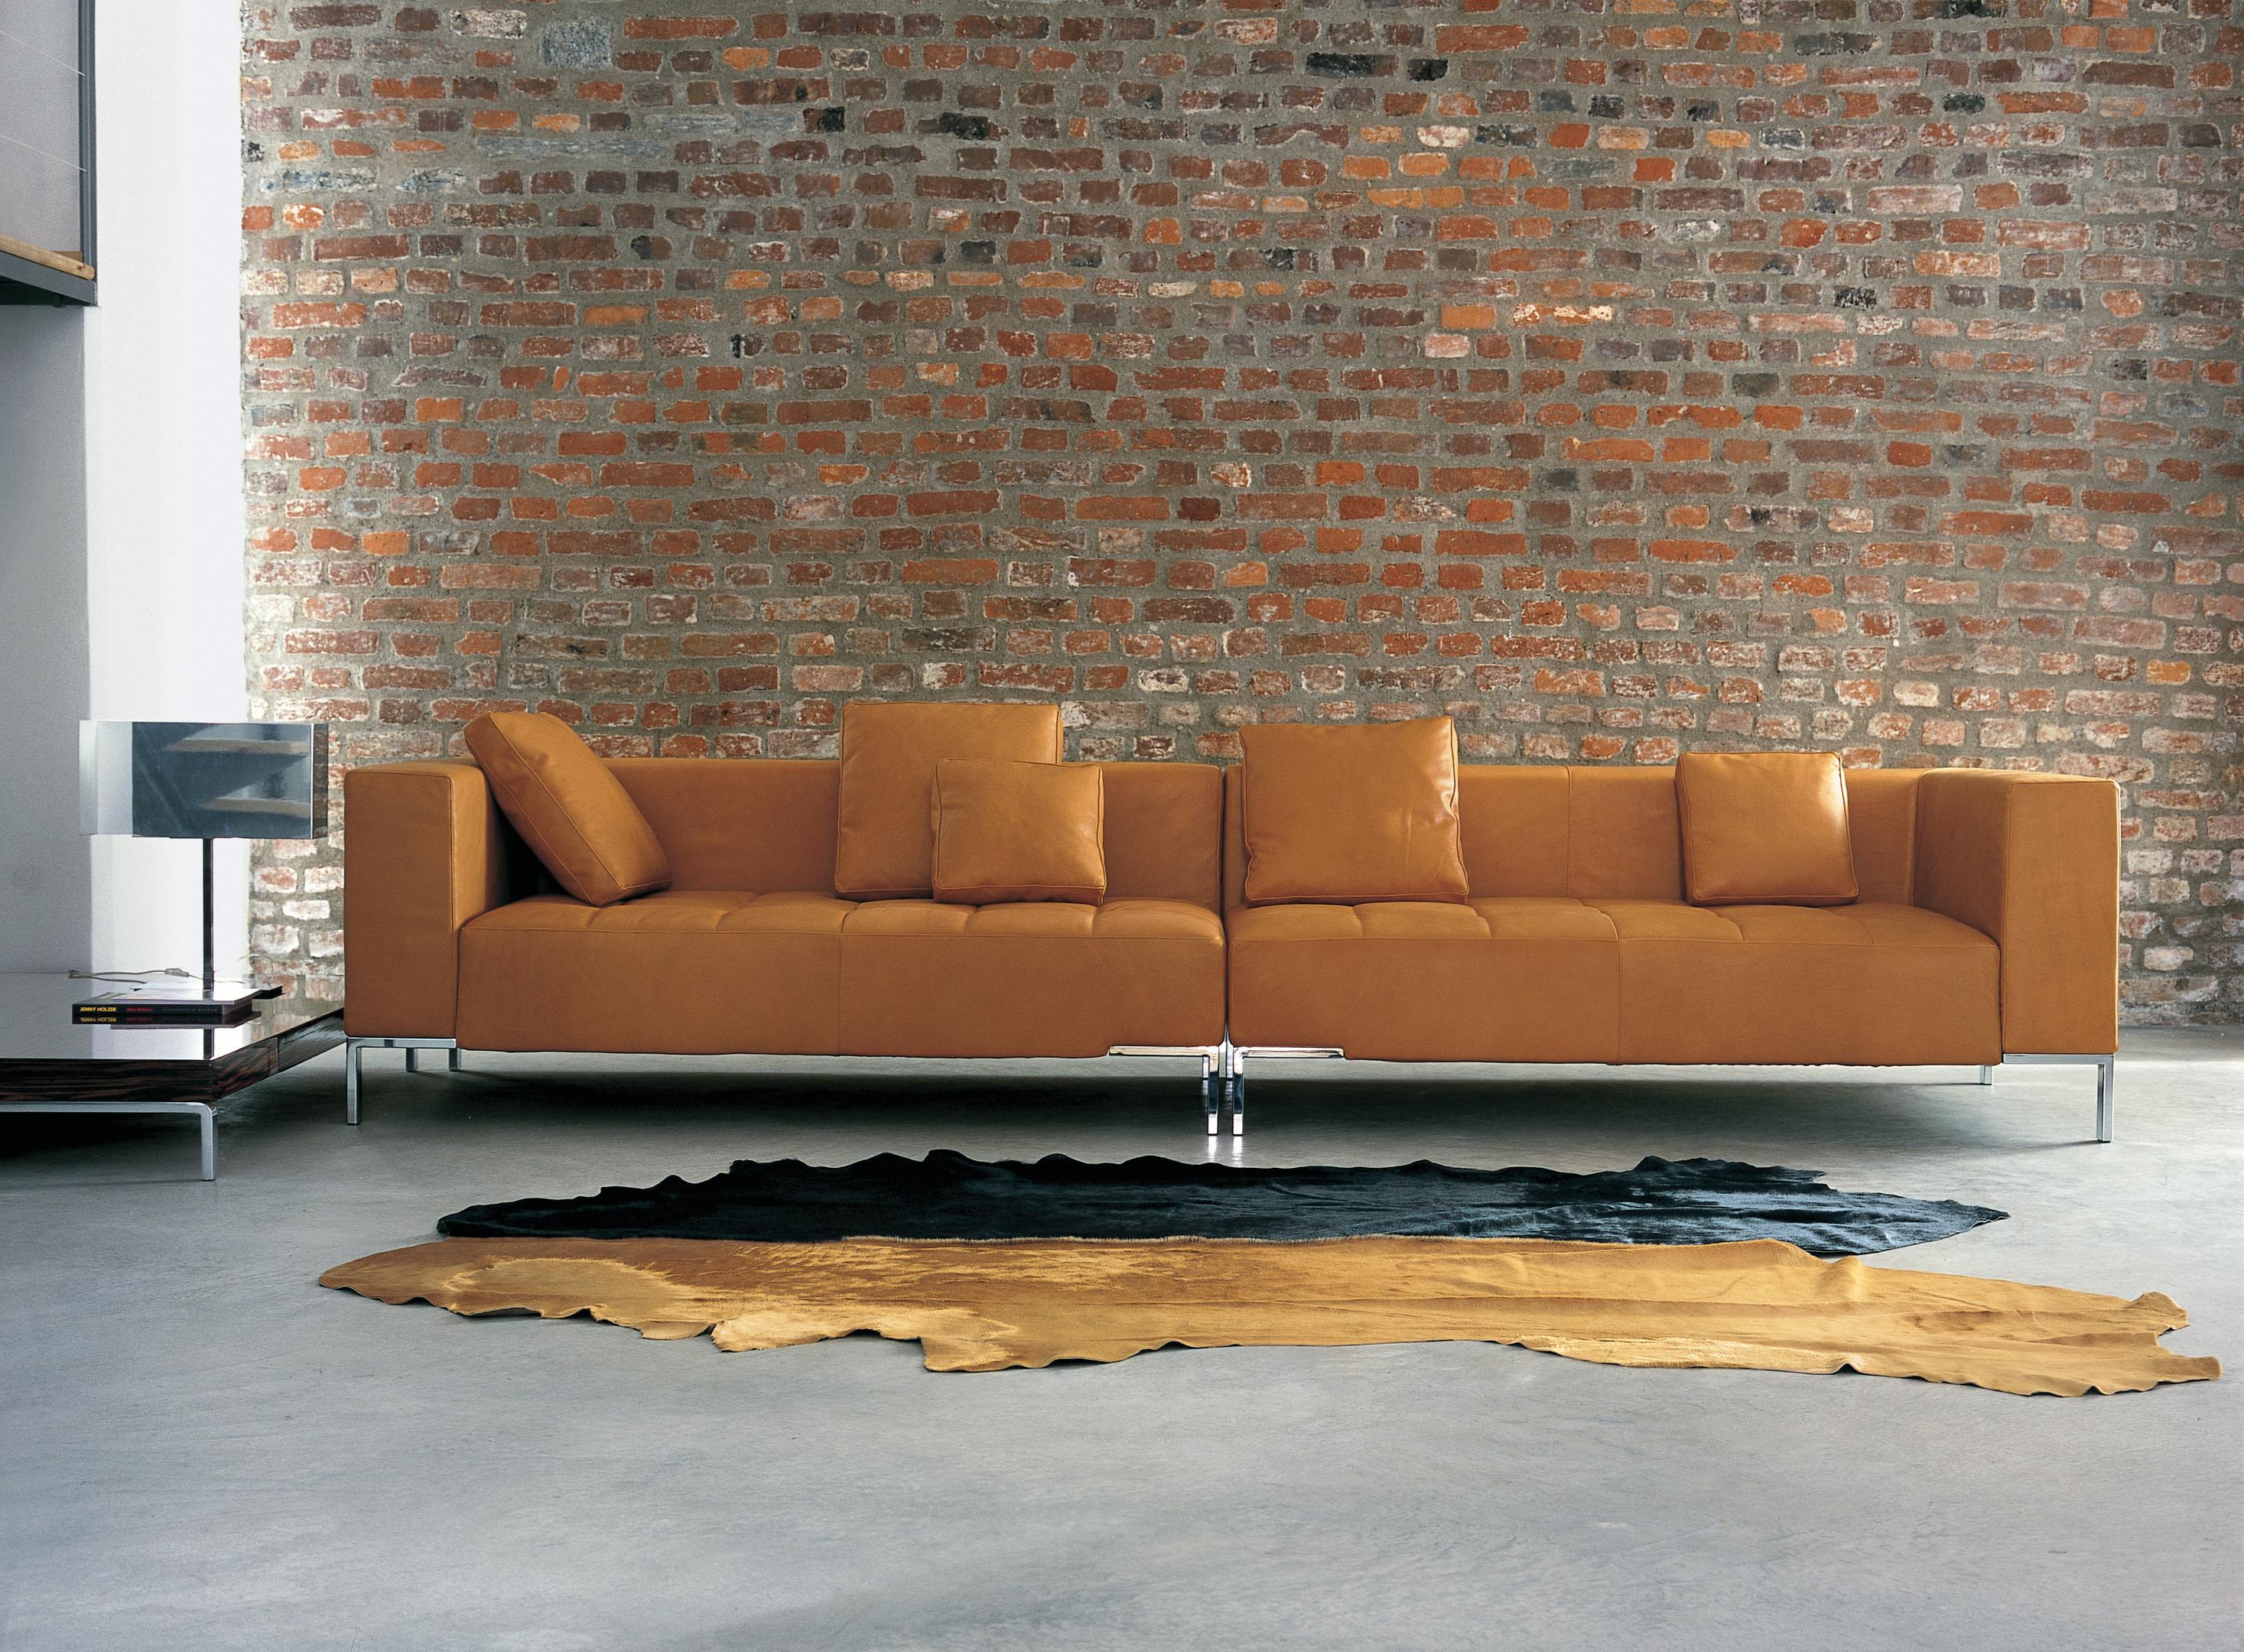 Zanotta Alfa Modular Sofa in Vico Fabric with Black Steel Frame by Emaf Progetti

These modular elements allow many corner or straight compositions. 

The day bed is also available with a length of 83 7/16”. Its price must be calculated by